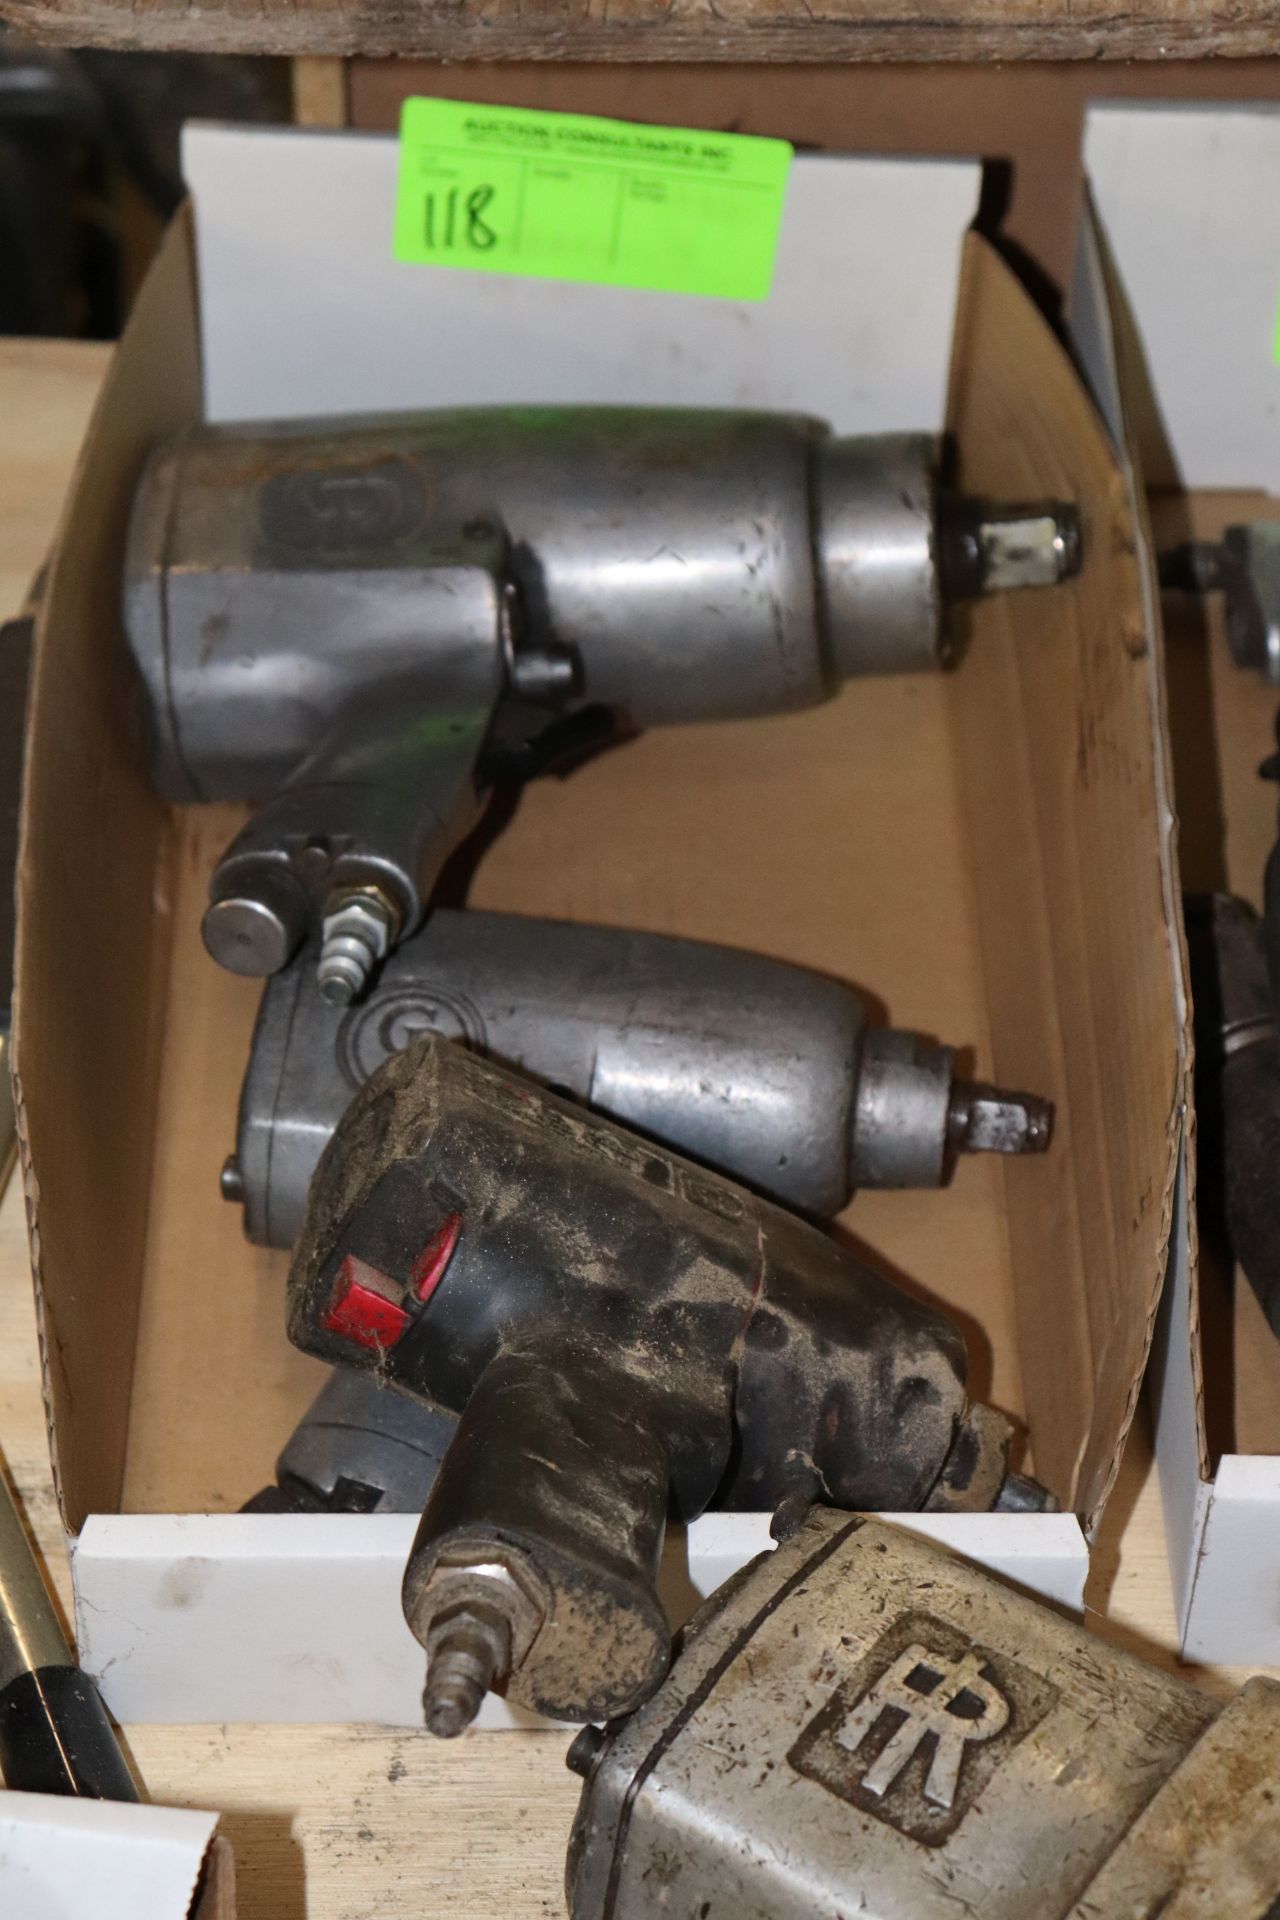 Chicago pneumatic 3/4", Chicago pneumatic 1/2" and Ingersoll 1/2" pneumatic impact wrench